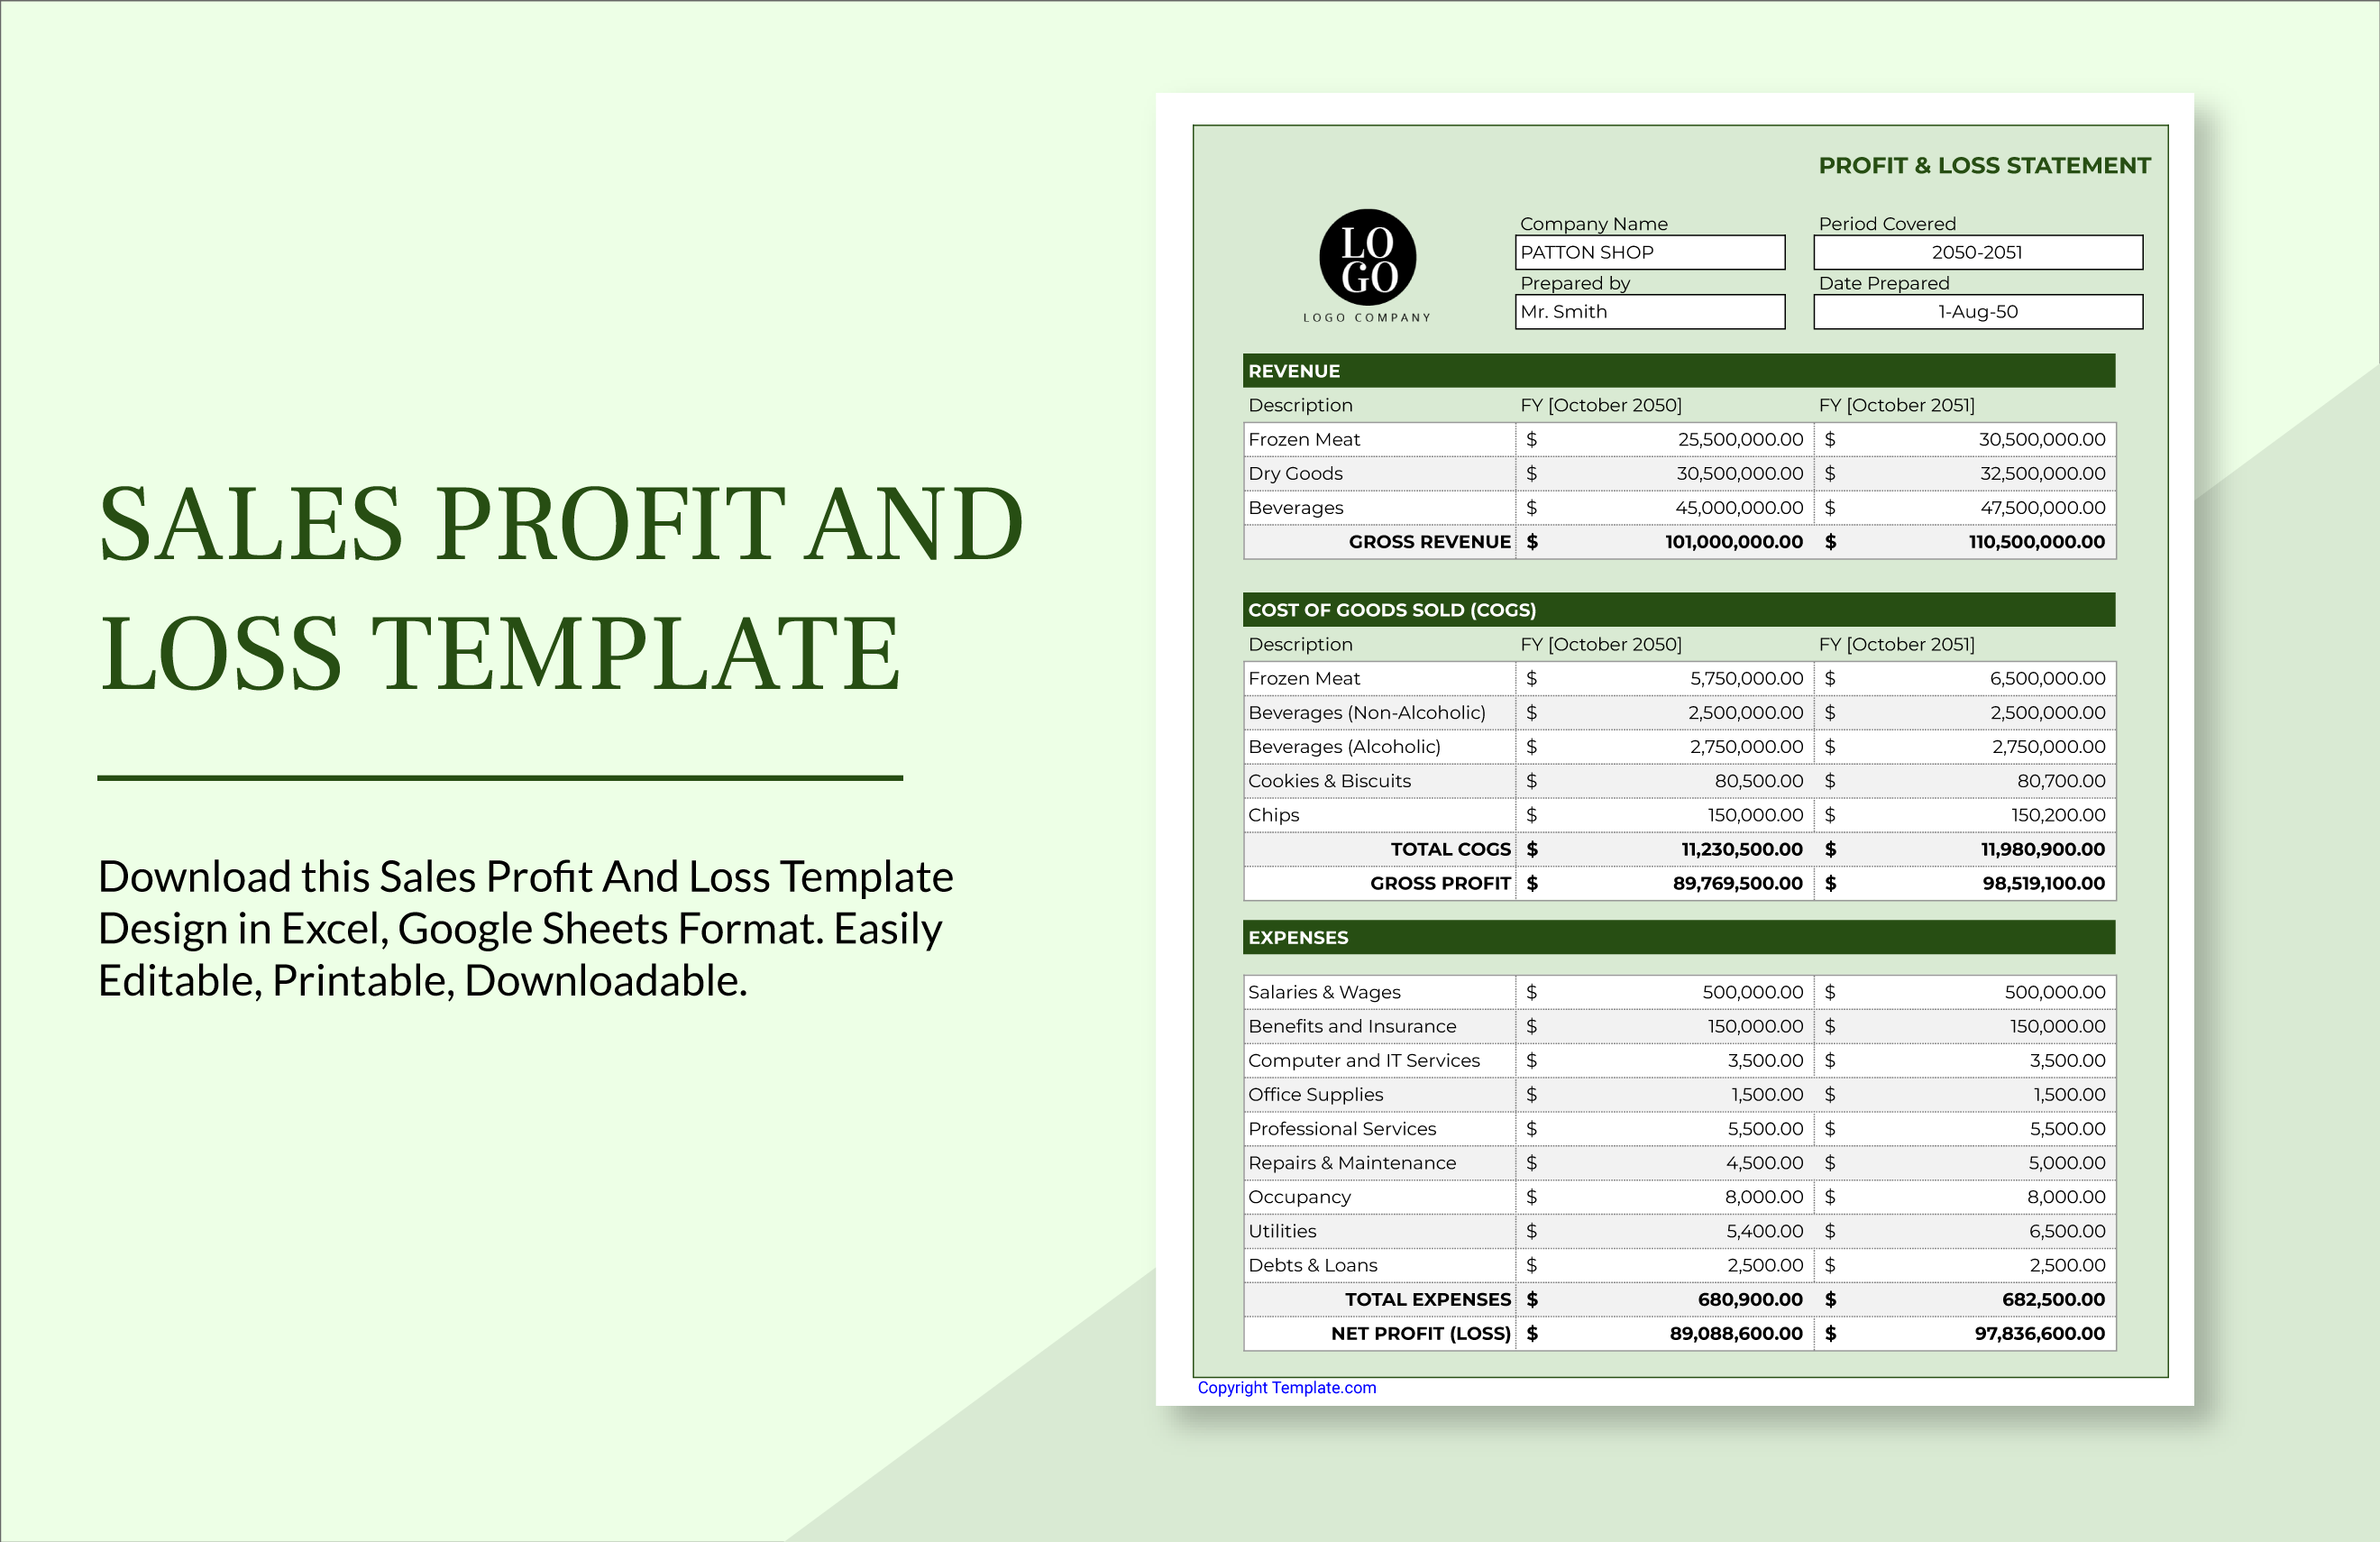 Sales Profit And Loss Template Google Sheets, Excel